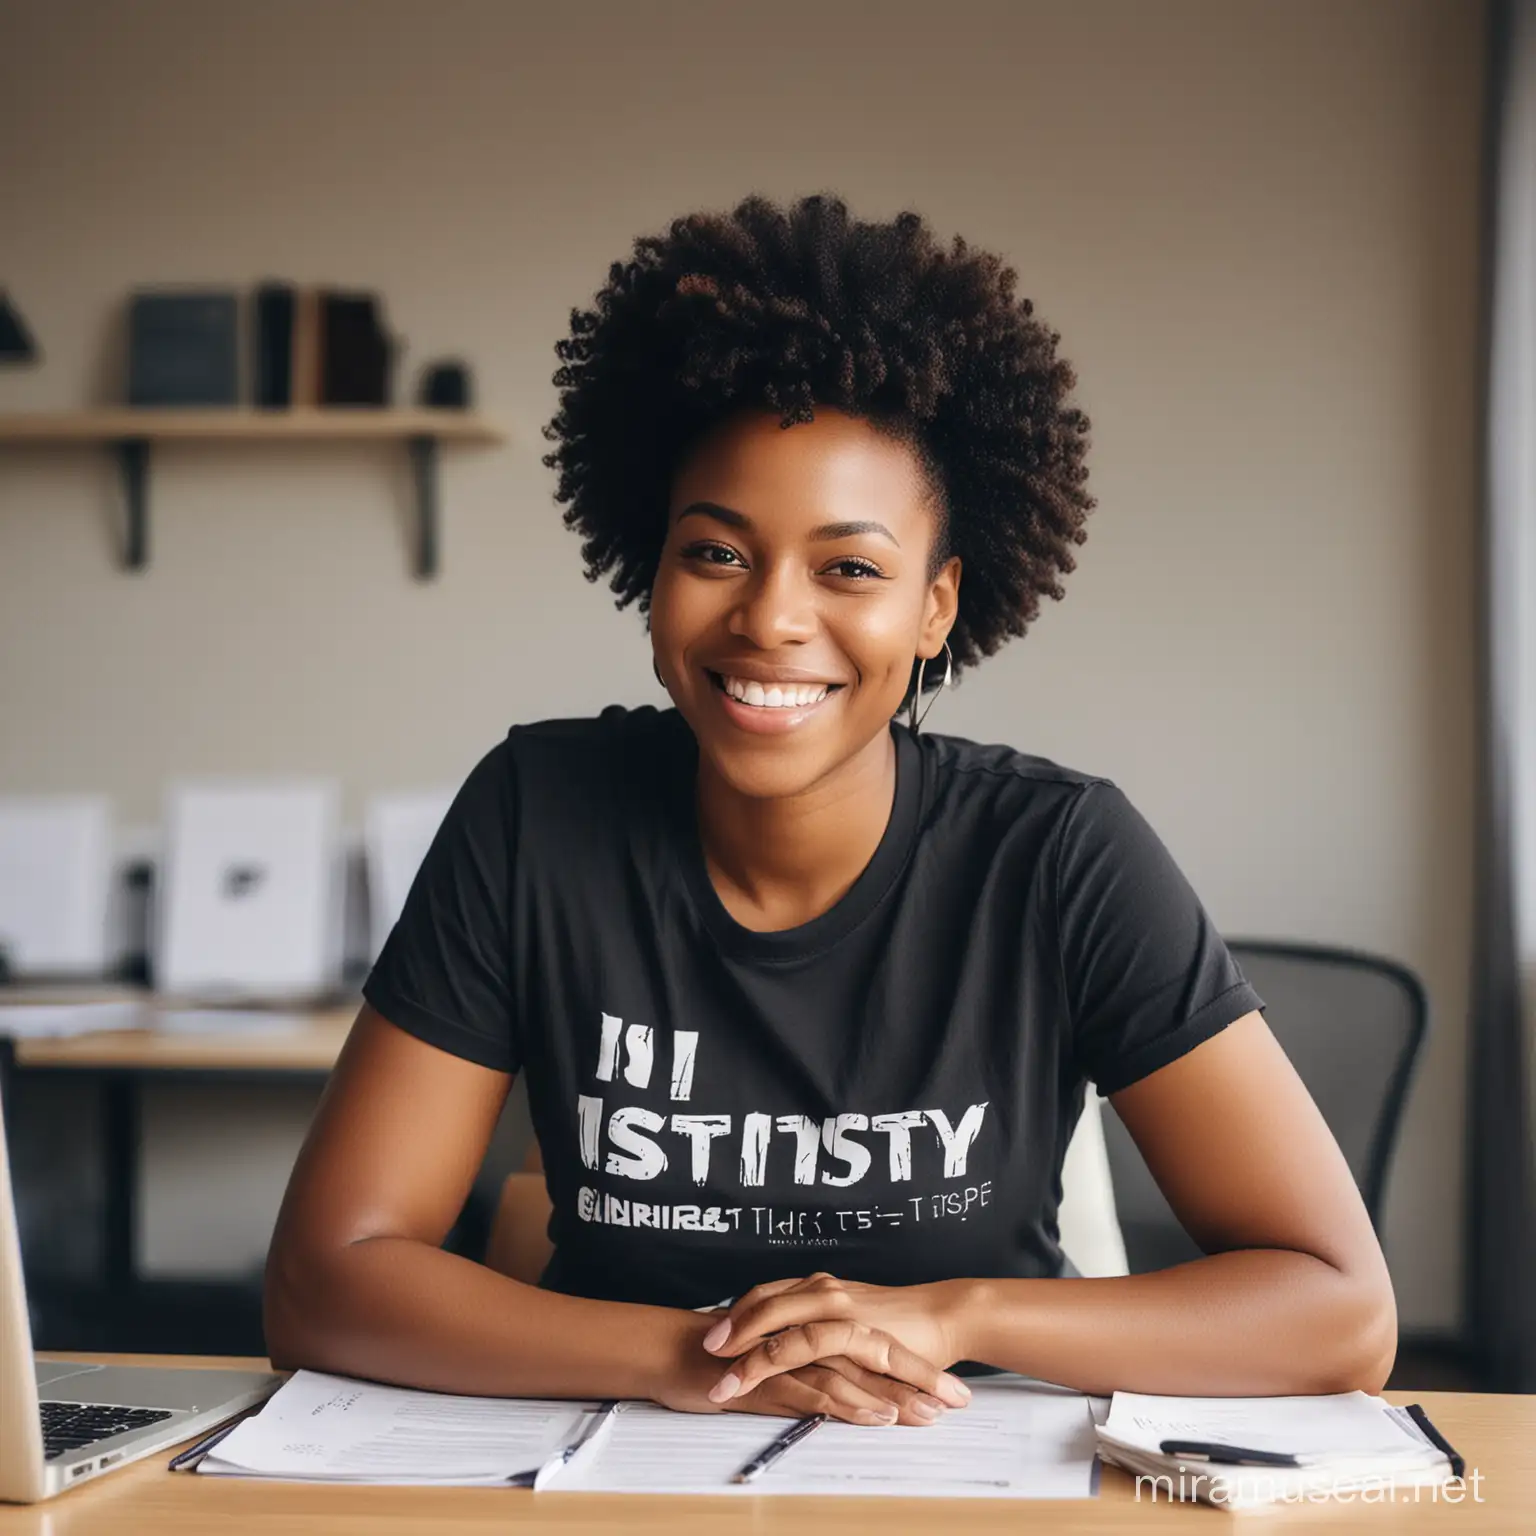 portrait of a Black woman wearing a T-shirt with the text 'I MUST TESTIFY' on it, smiling, natural light, high resolution in an office